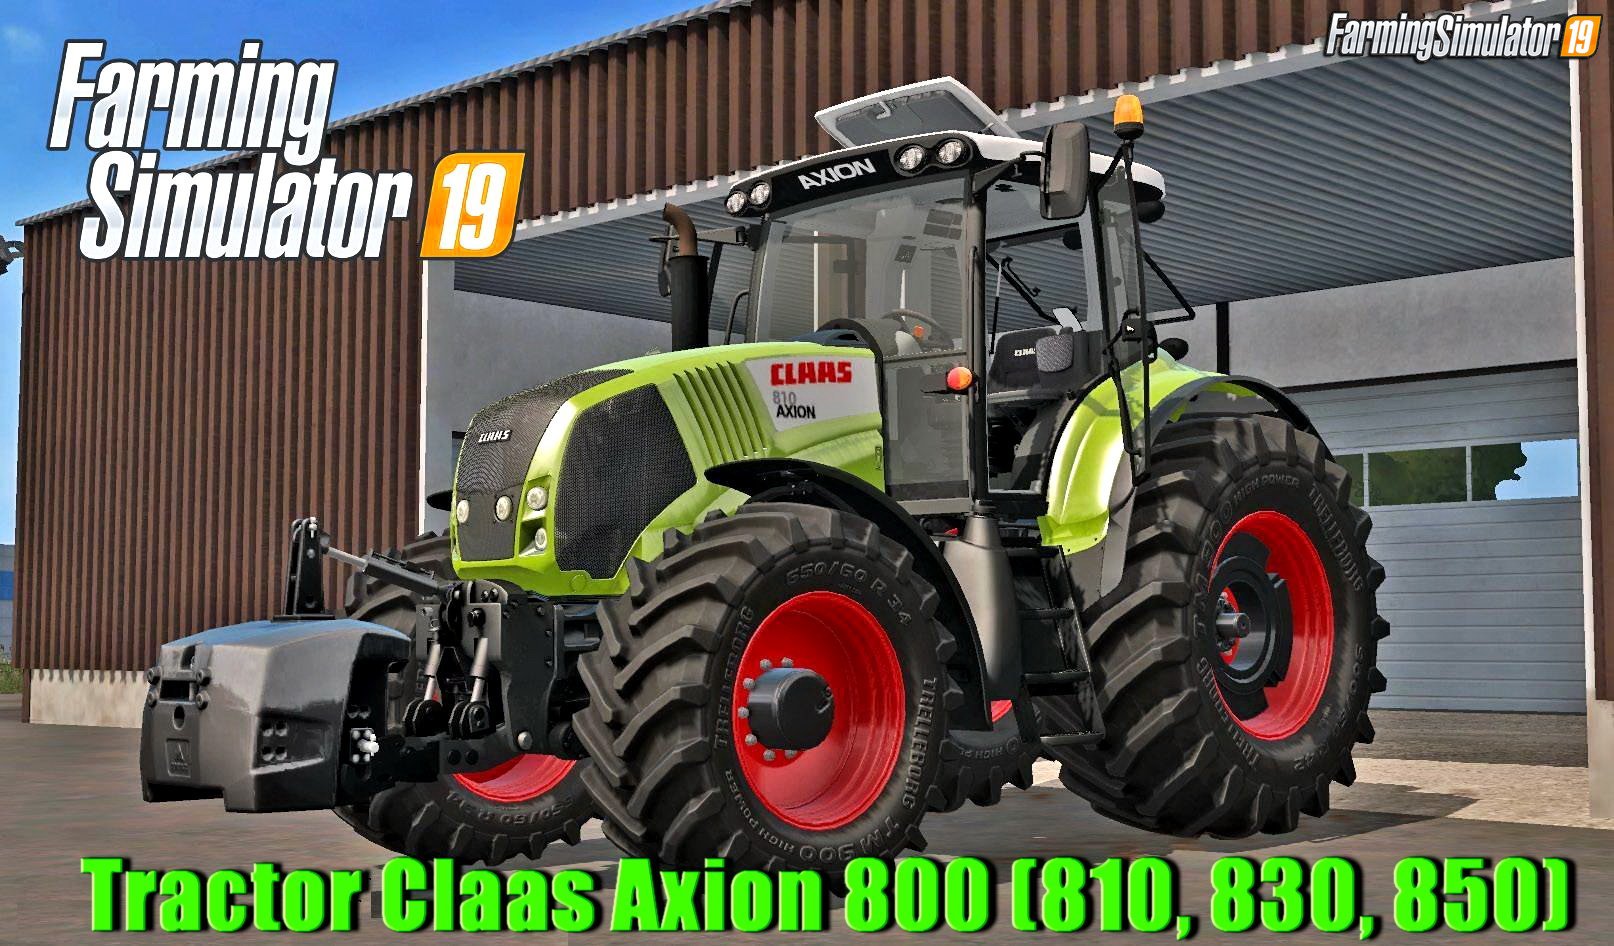 Tractor Claas Axion 800 (810, 830, 850) v2.0 for FS19